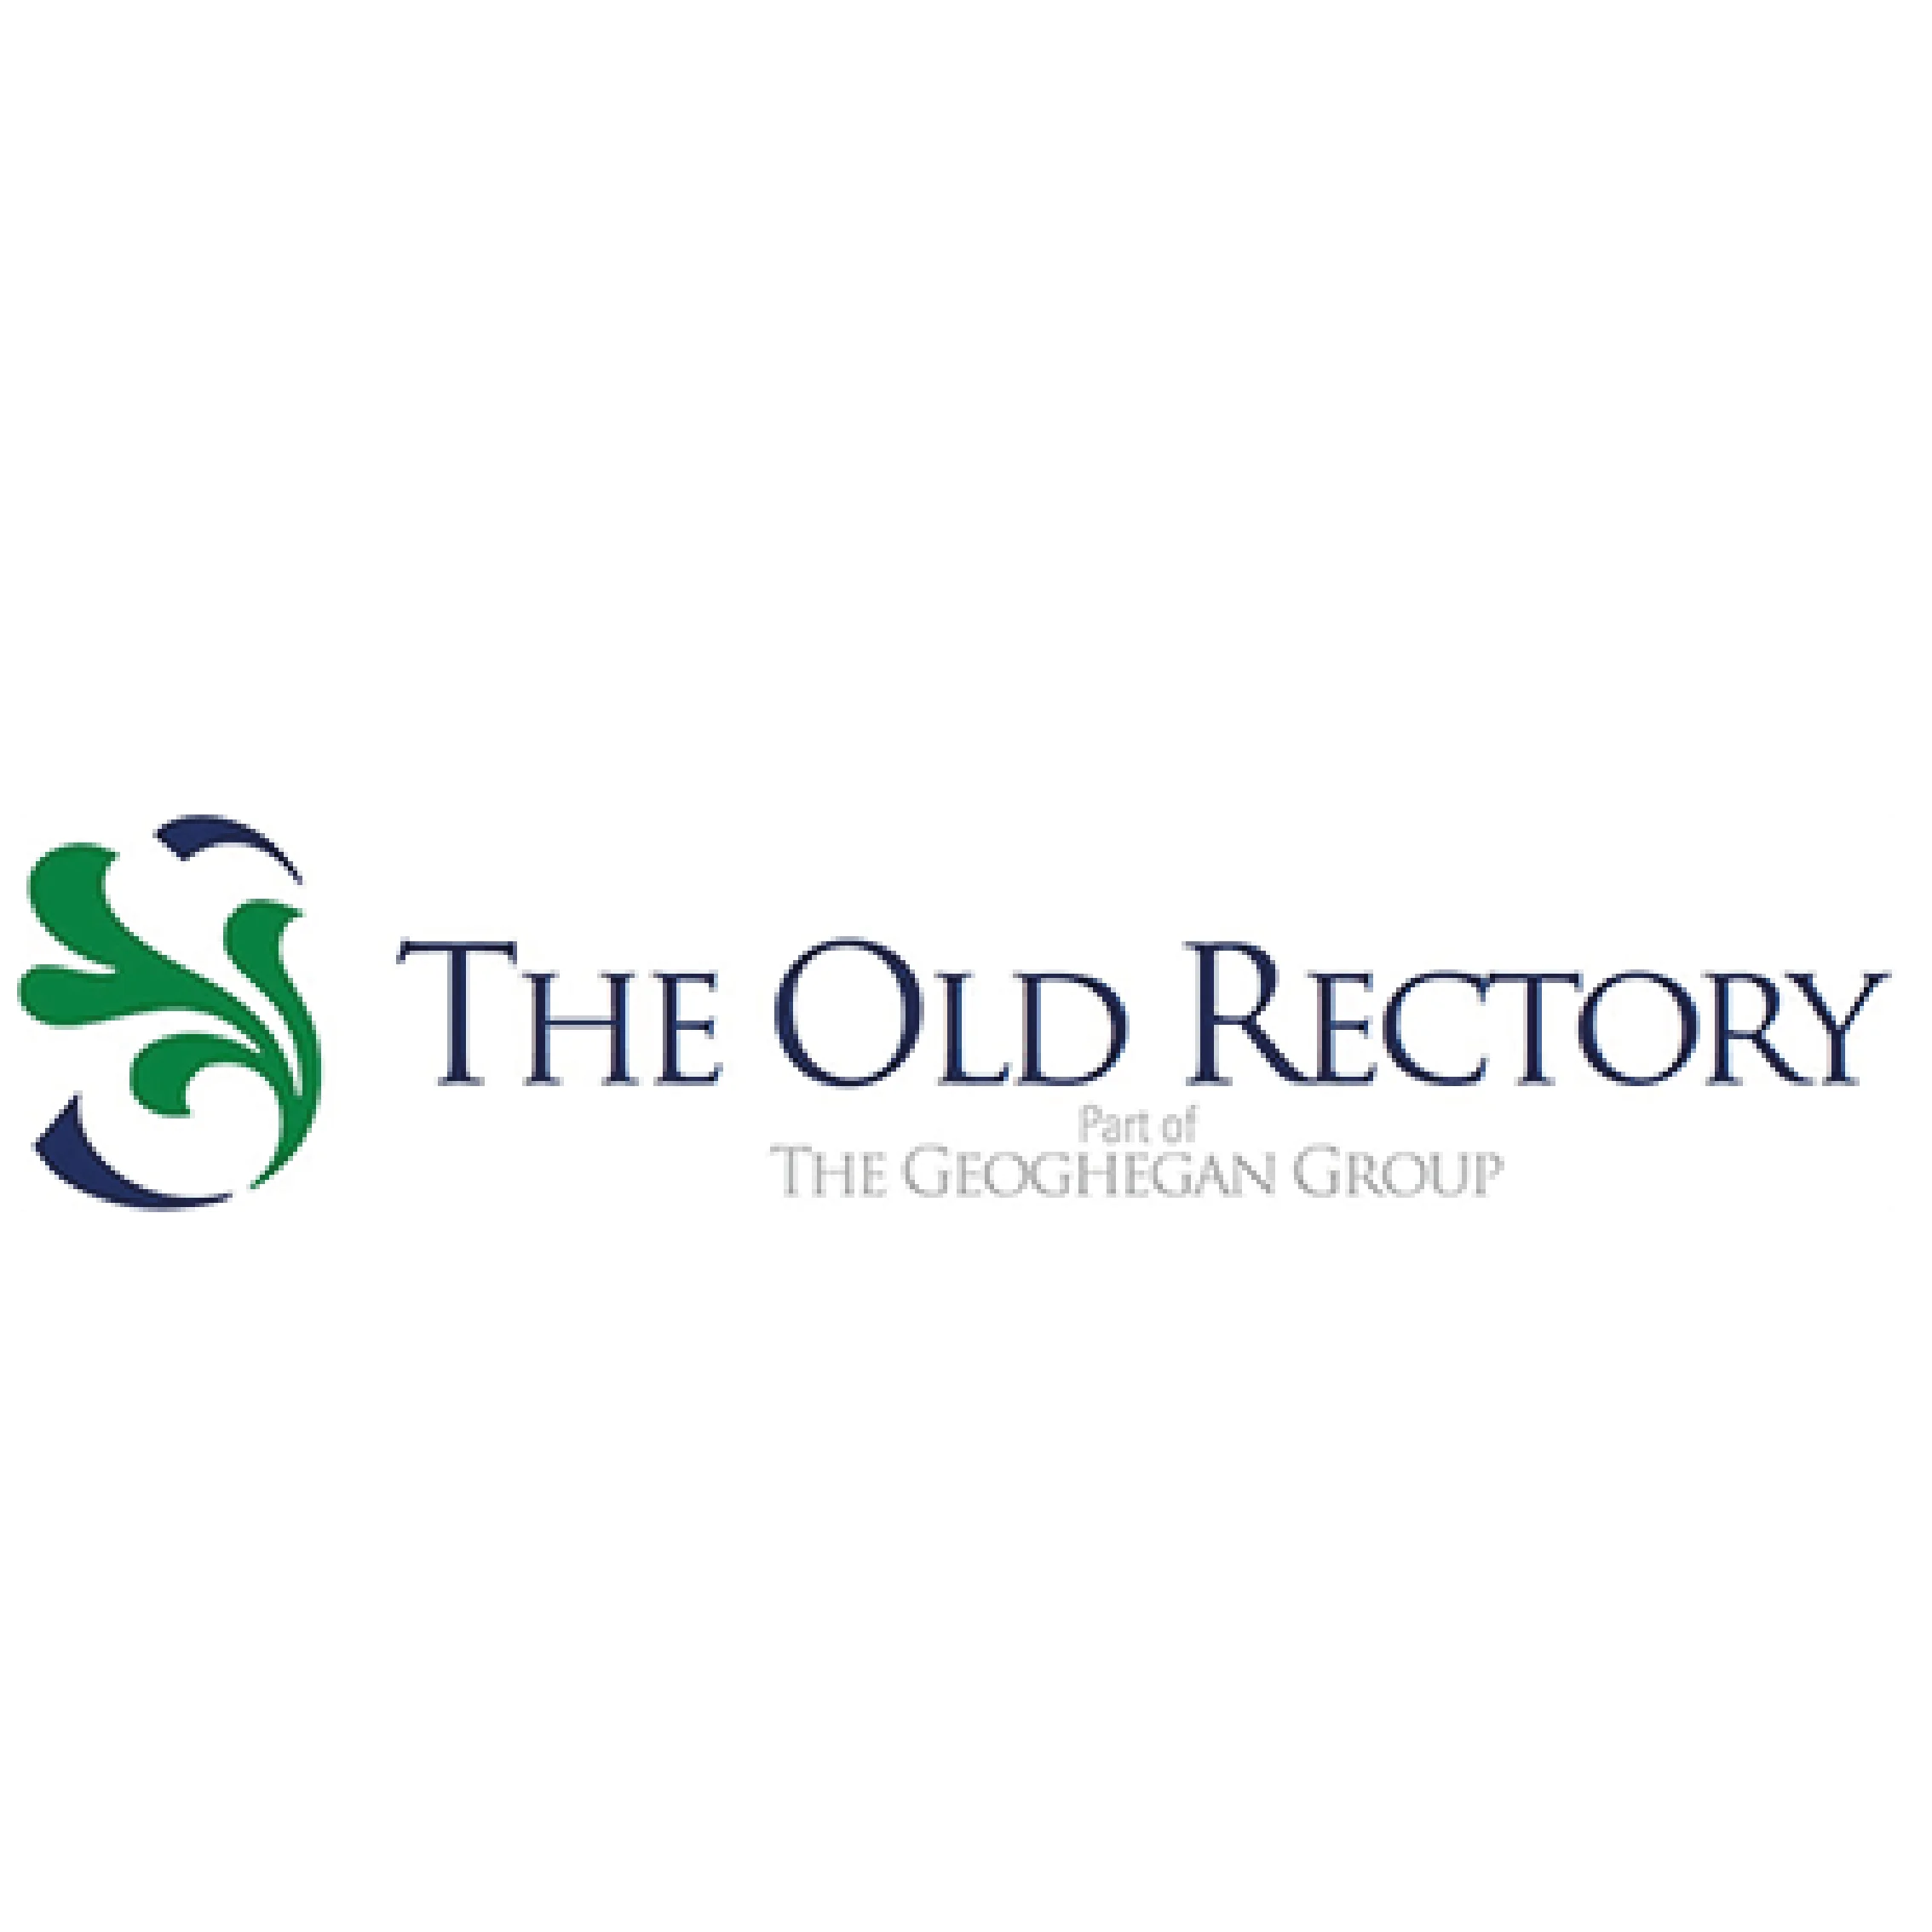 The old rectory logo